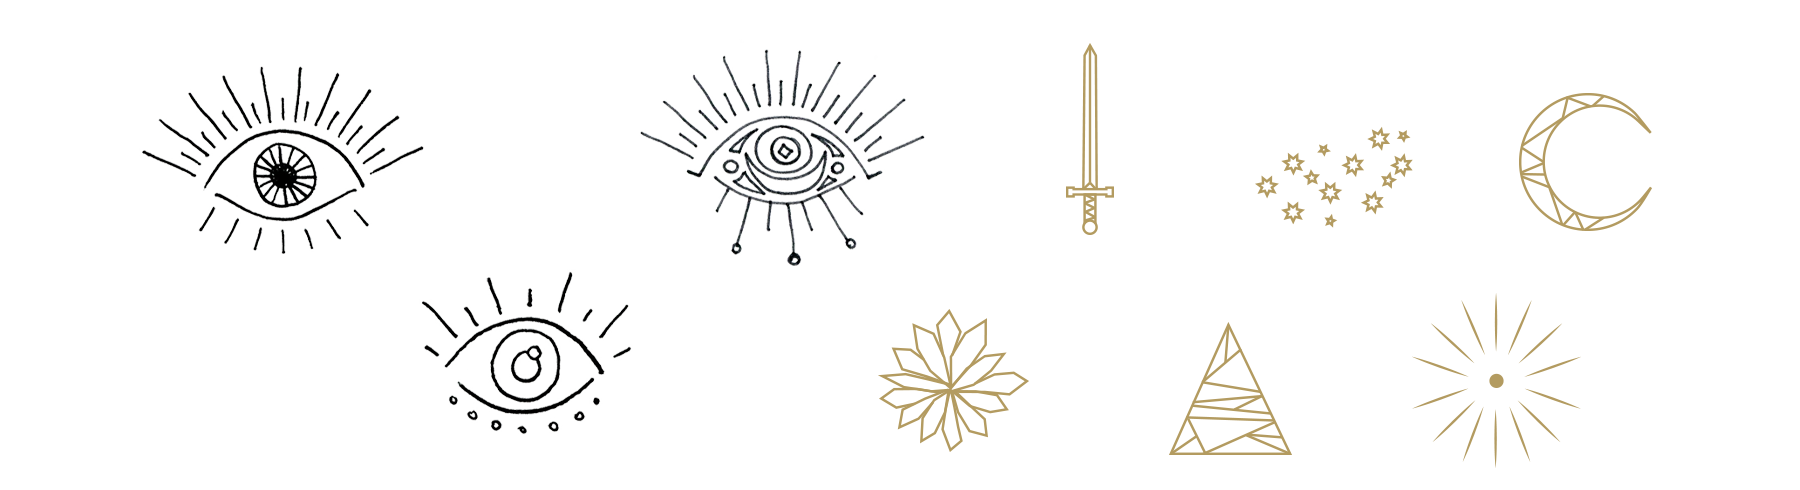 OLWEN Jewelry eye illustration explorations and geometric icons of a sword, flower, stars, moon, and pyramid.